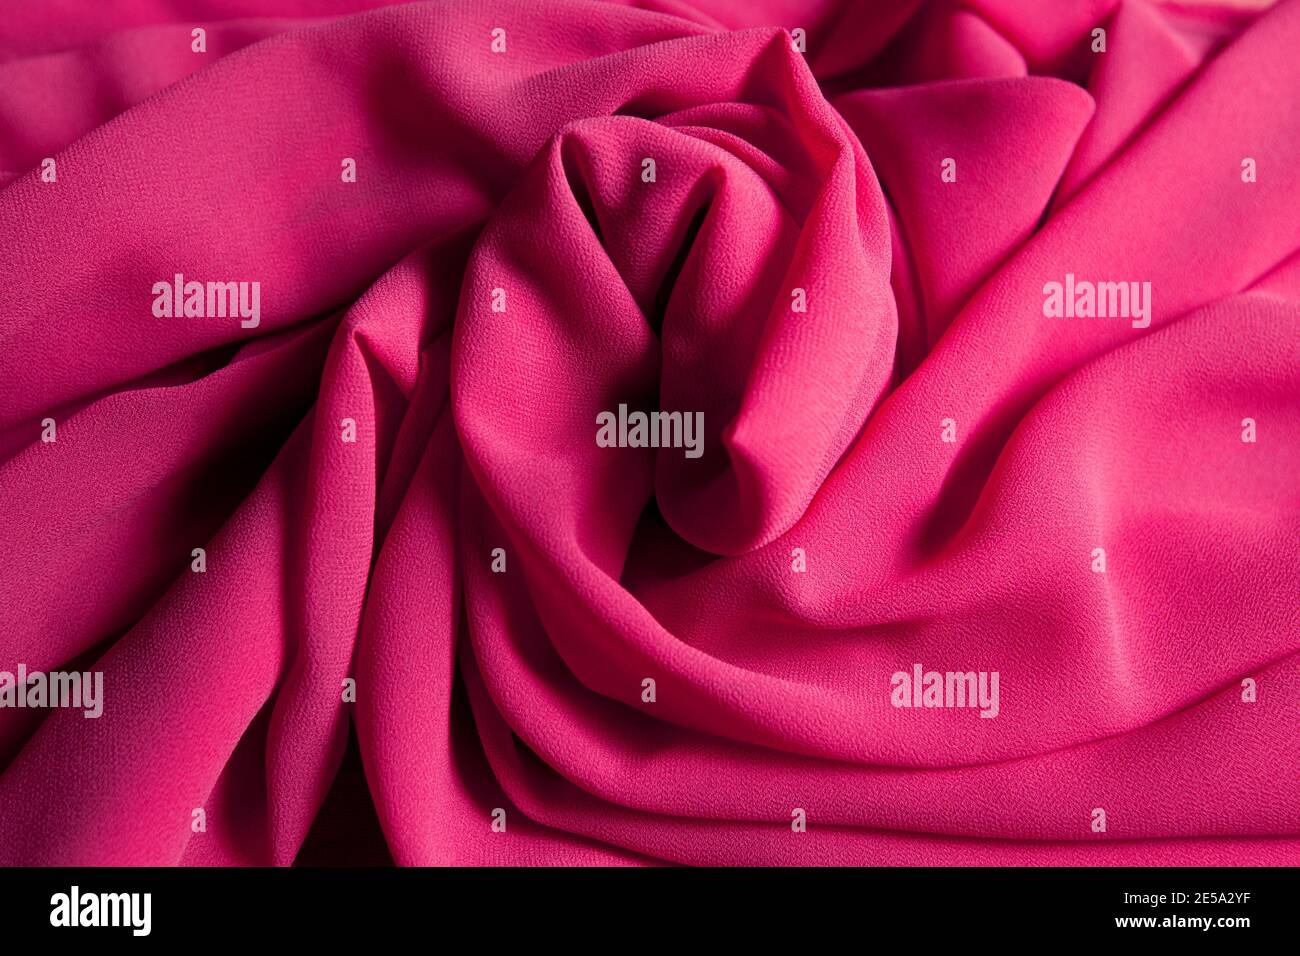 pink crumpled tulle fabric. fabric background Stock Photo